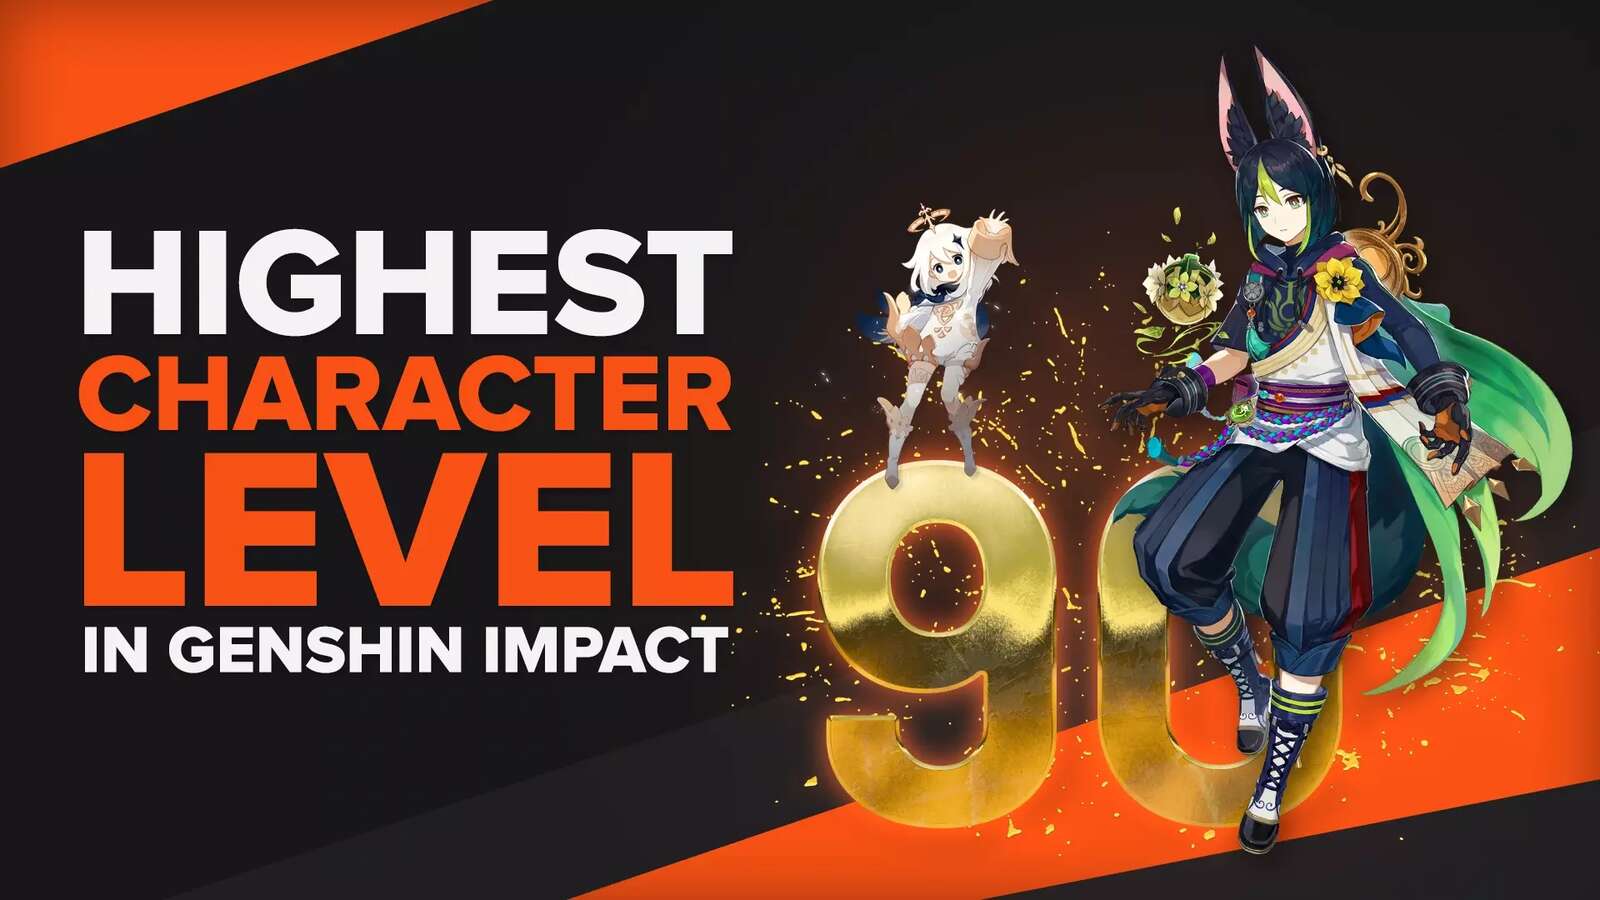 Learn The Highest Character Level in Genshin Impact